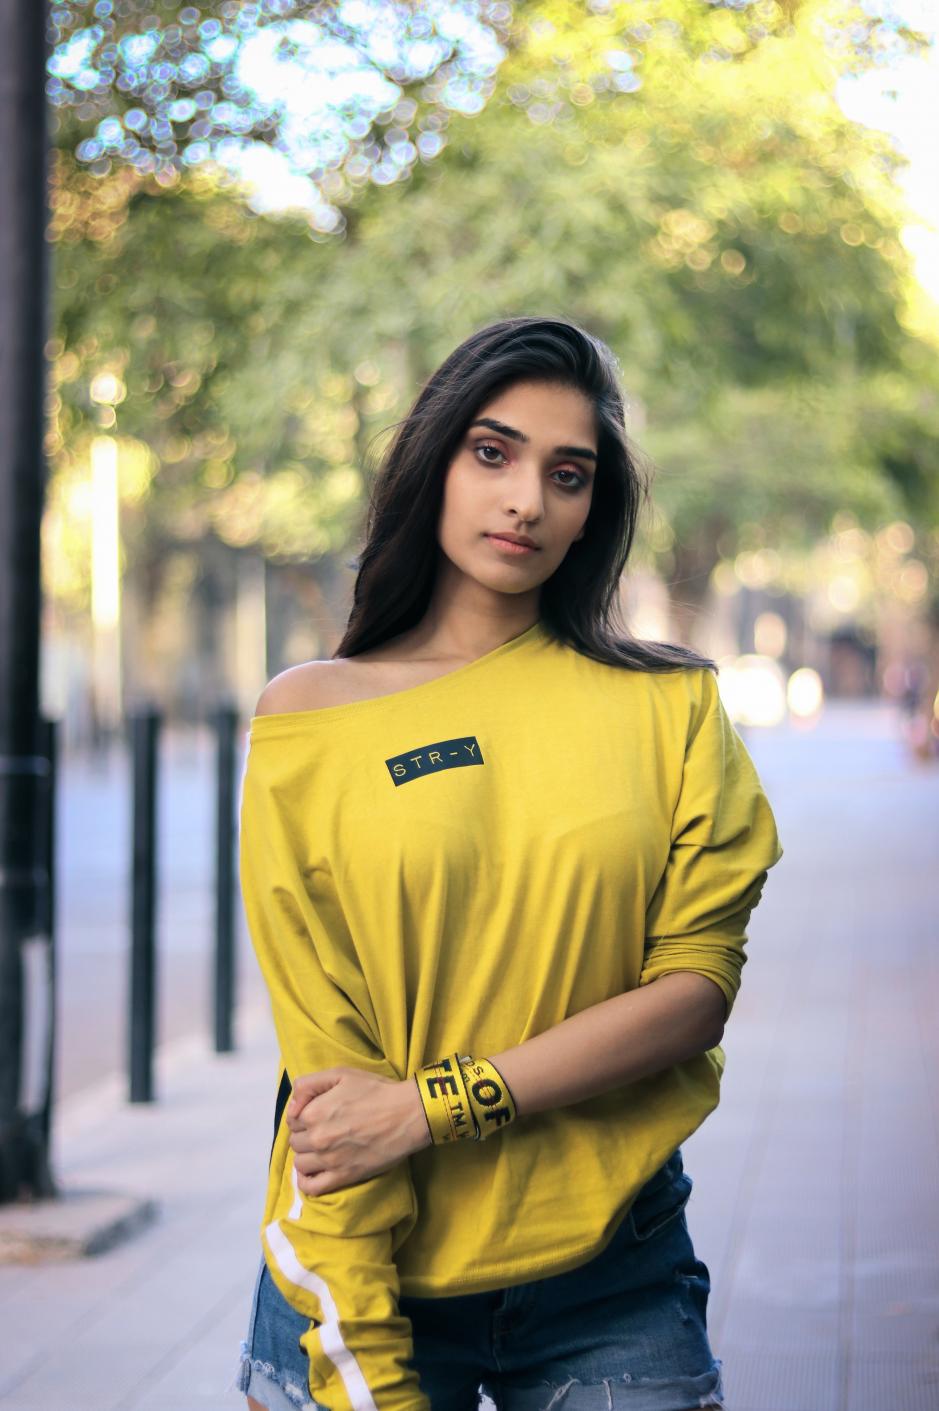 A girl wearing yellow round neck full sleeves T-shirt with white strips on the sleeves and str-y written on it is standing on a footpath